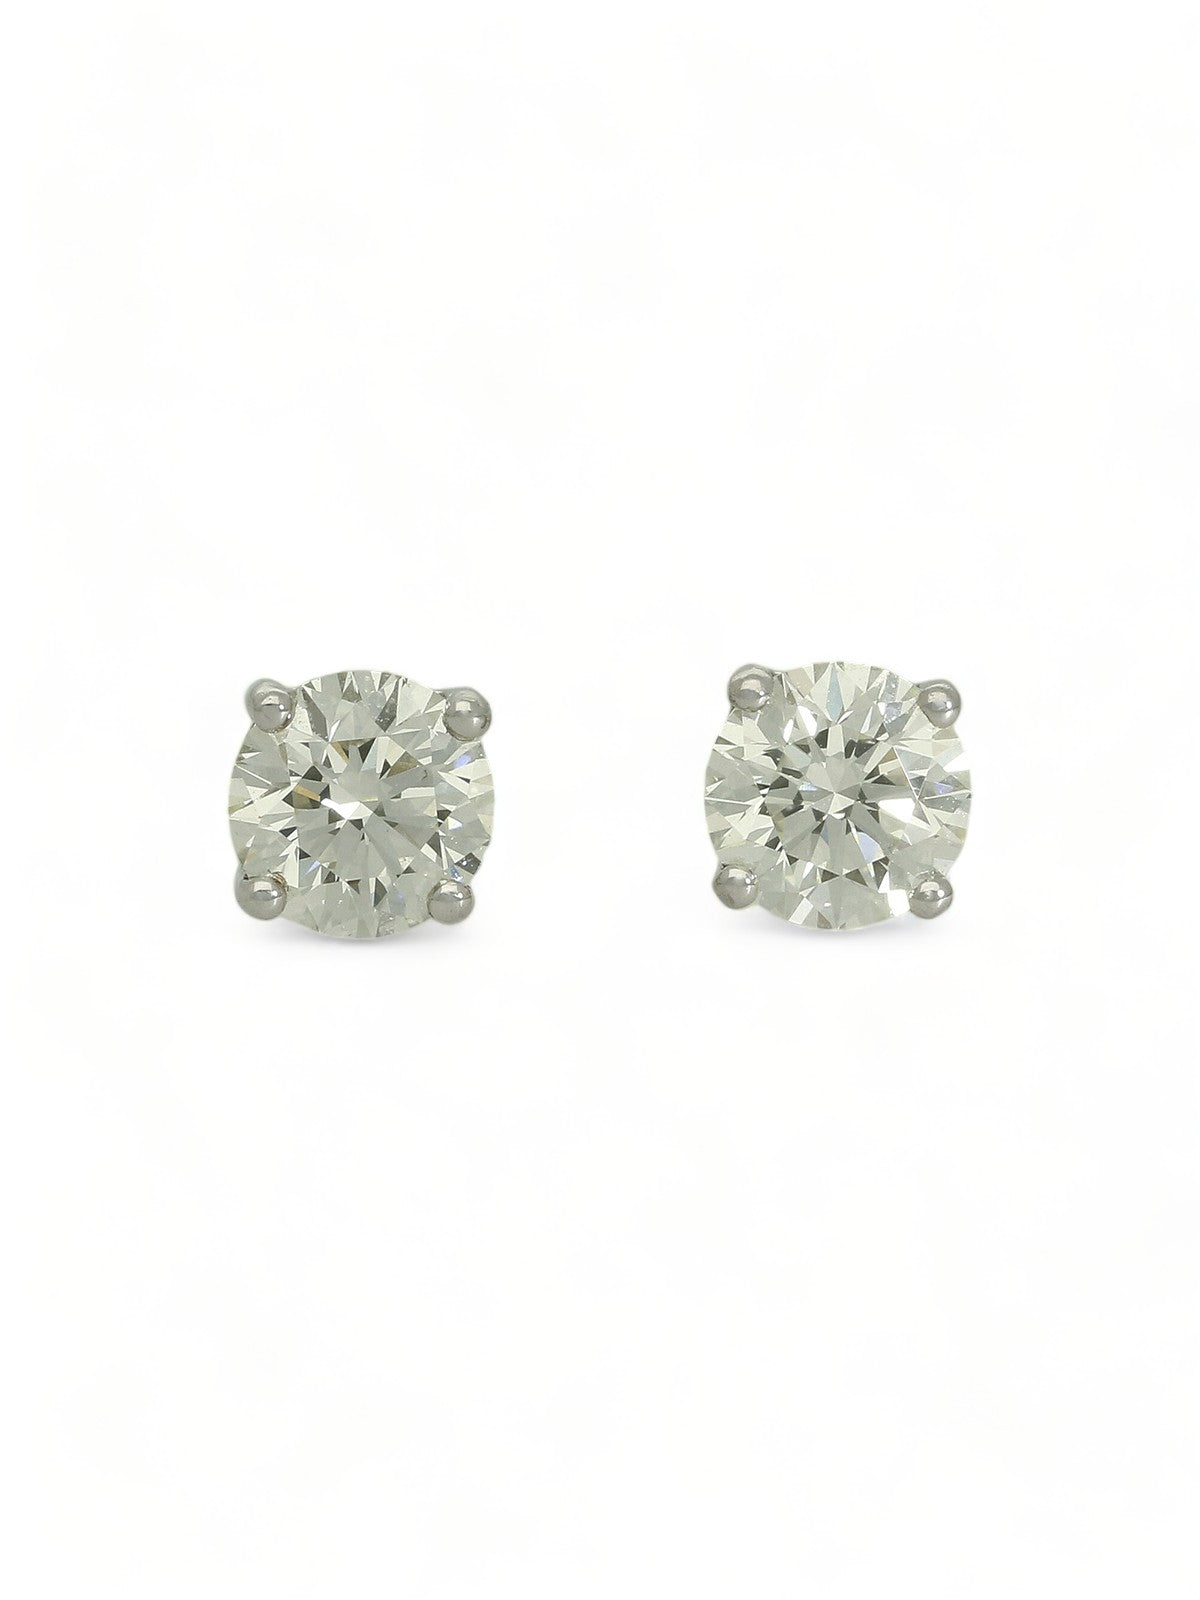 Diamond Solitaire Stud Earrings "The Catherine Collection" 1.40ct Round Brilliant Cut in 18ct White Gold